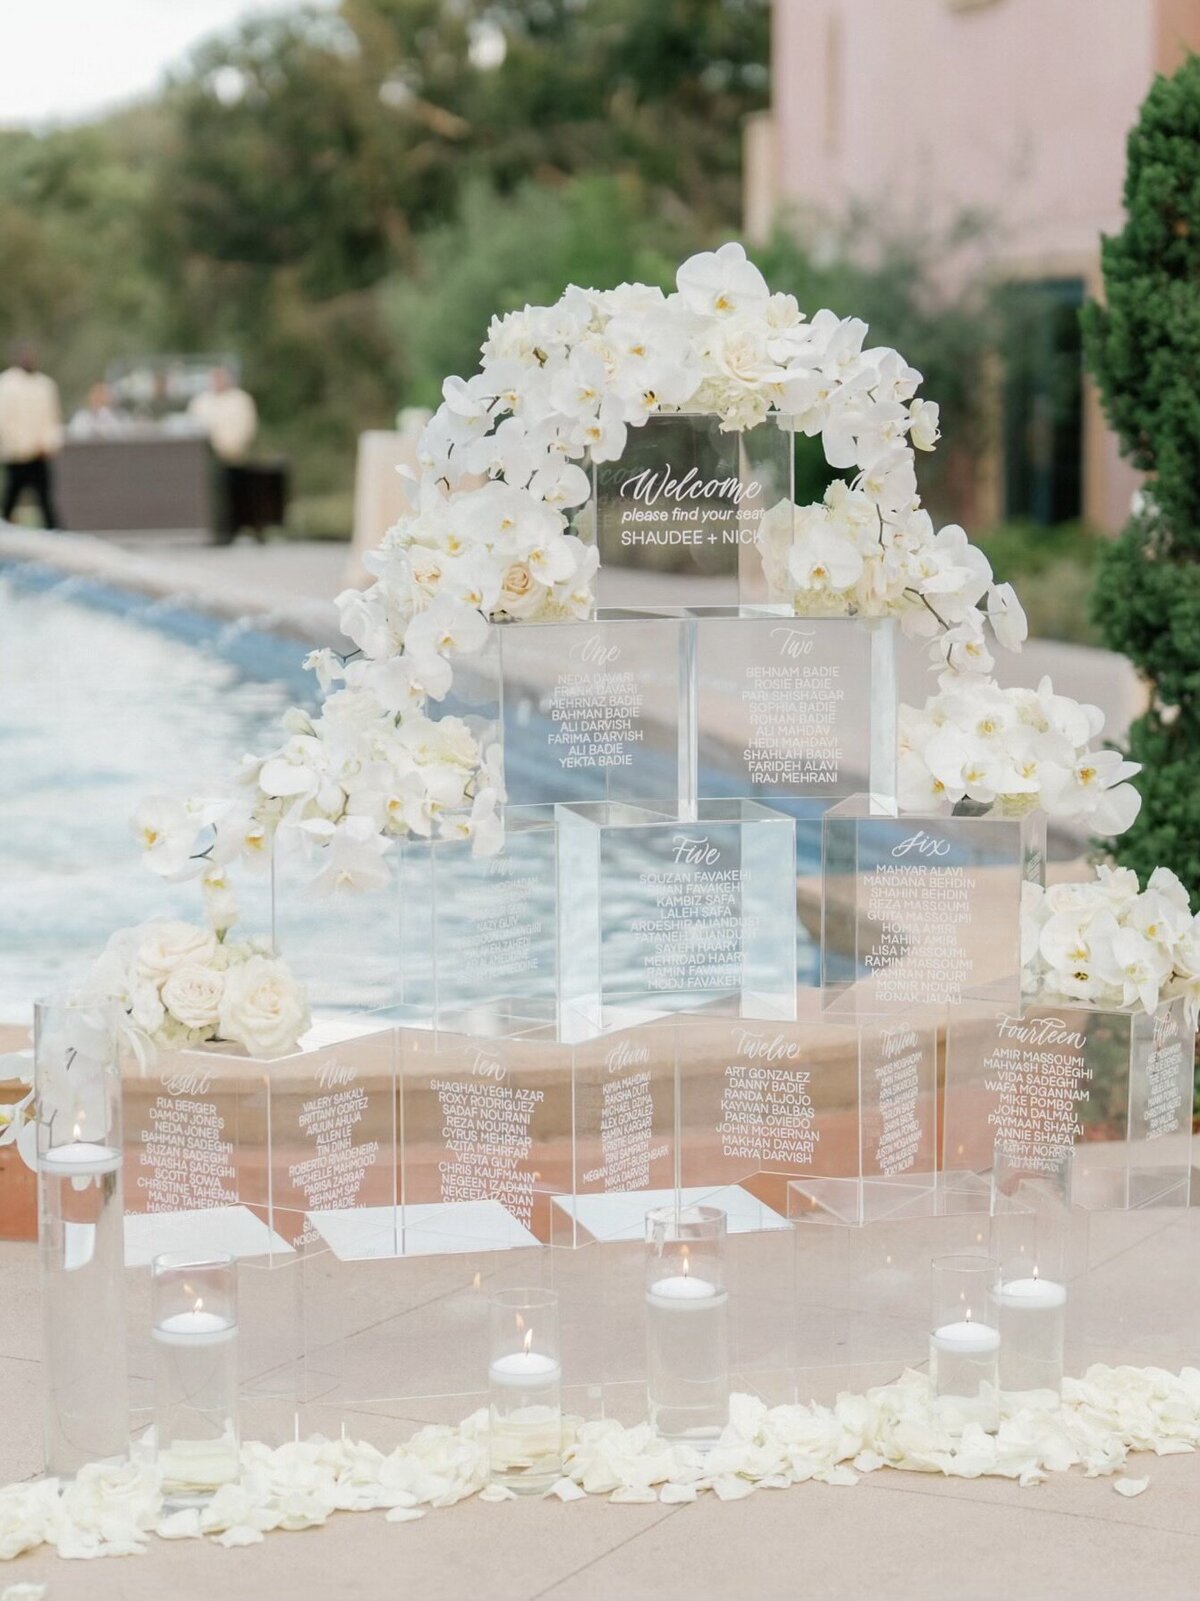 Clear acrylic boxes stacked to create a seating chart, decorated with white florals. Available for rent in the Bay Area